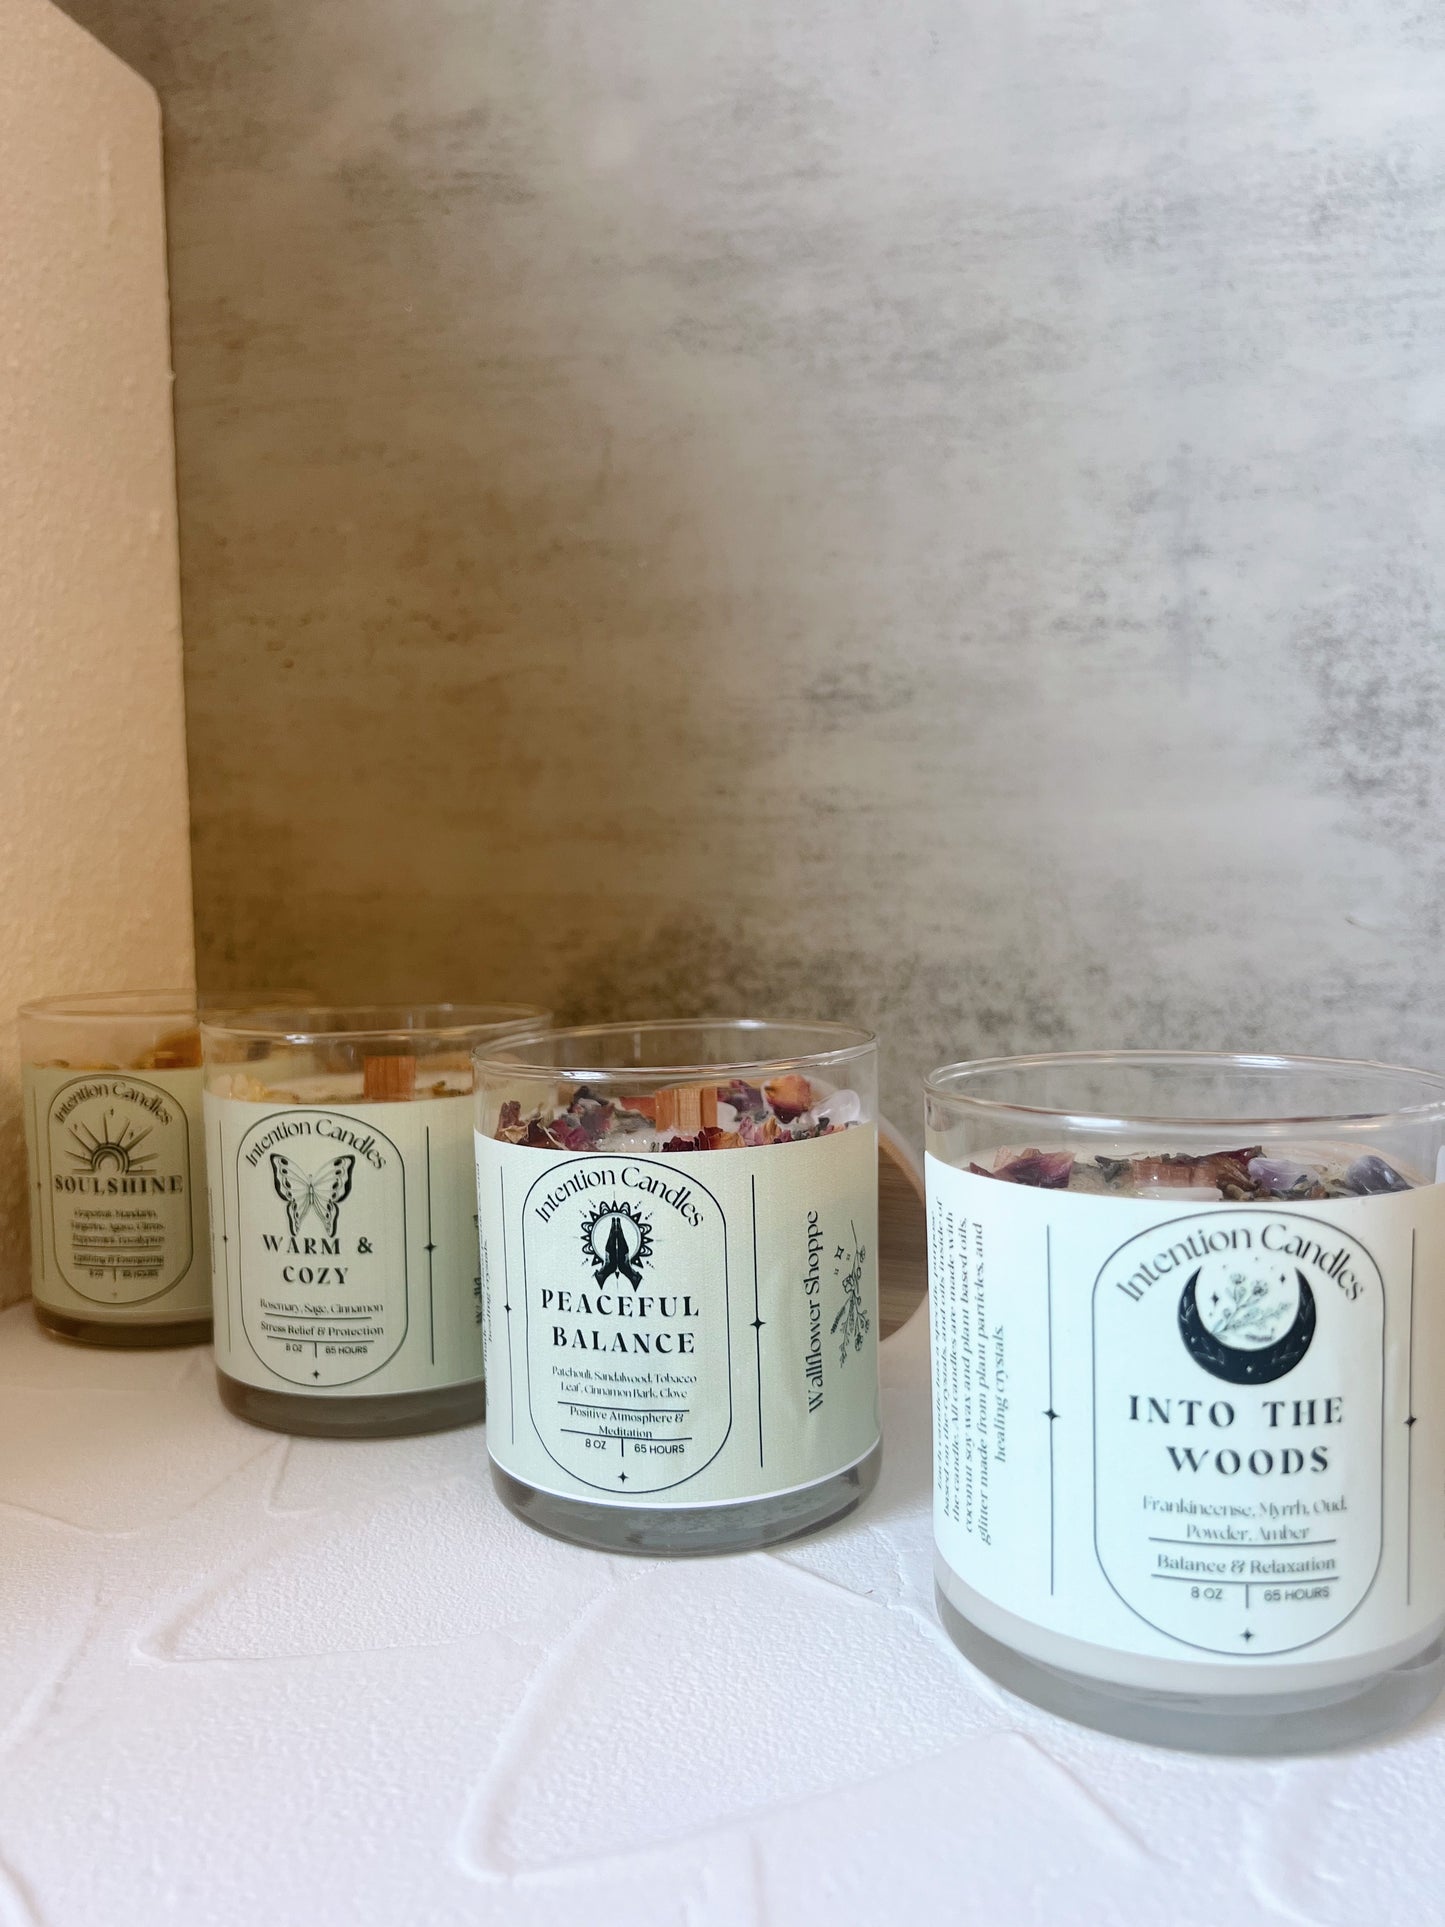 Intention Candles